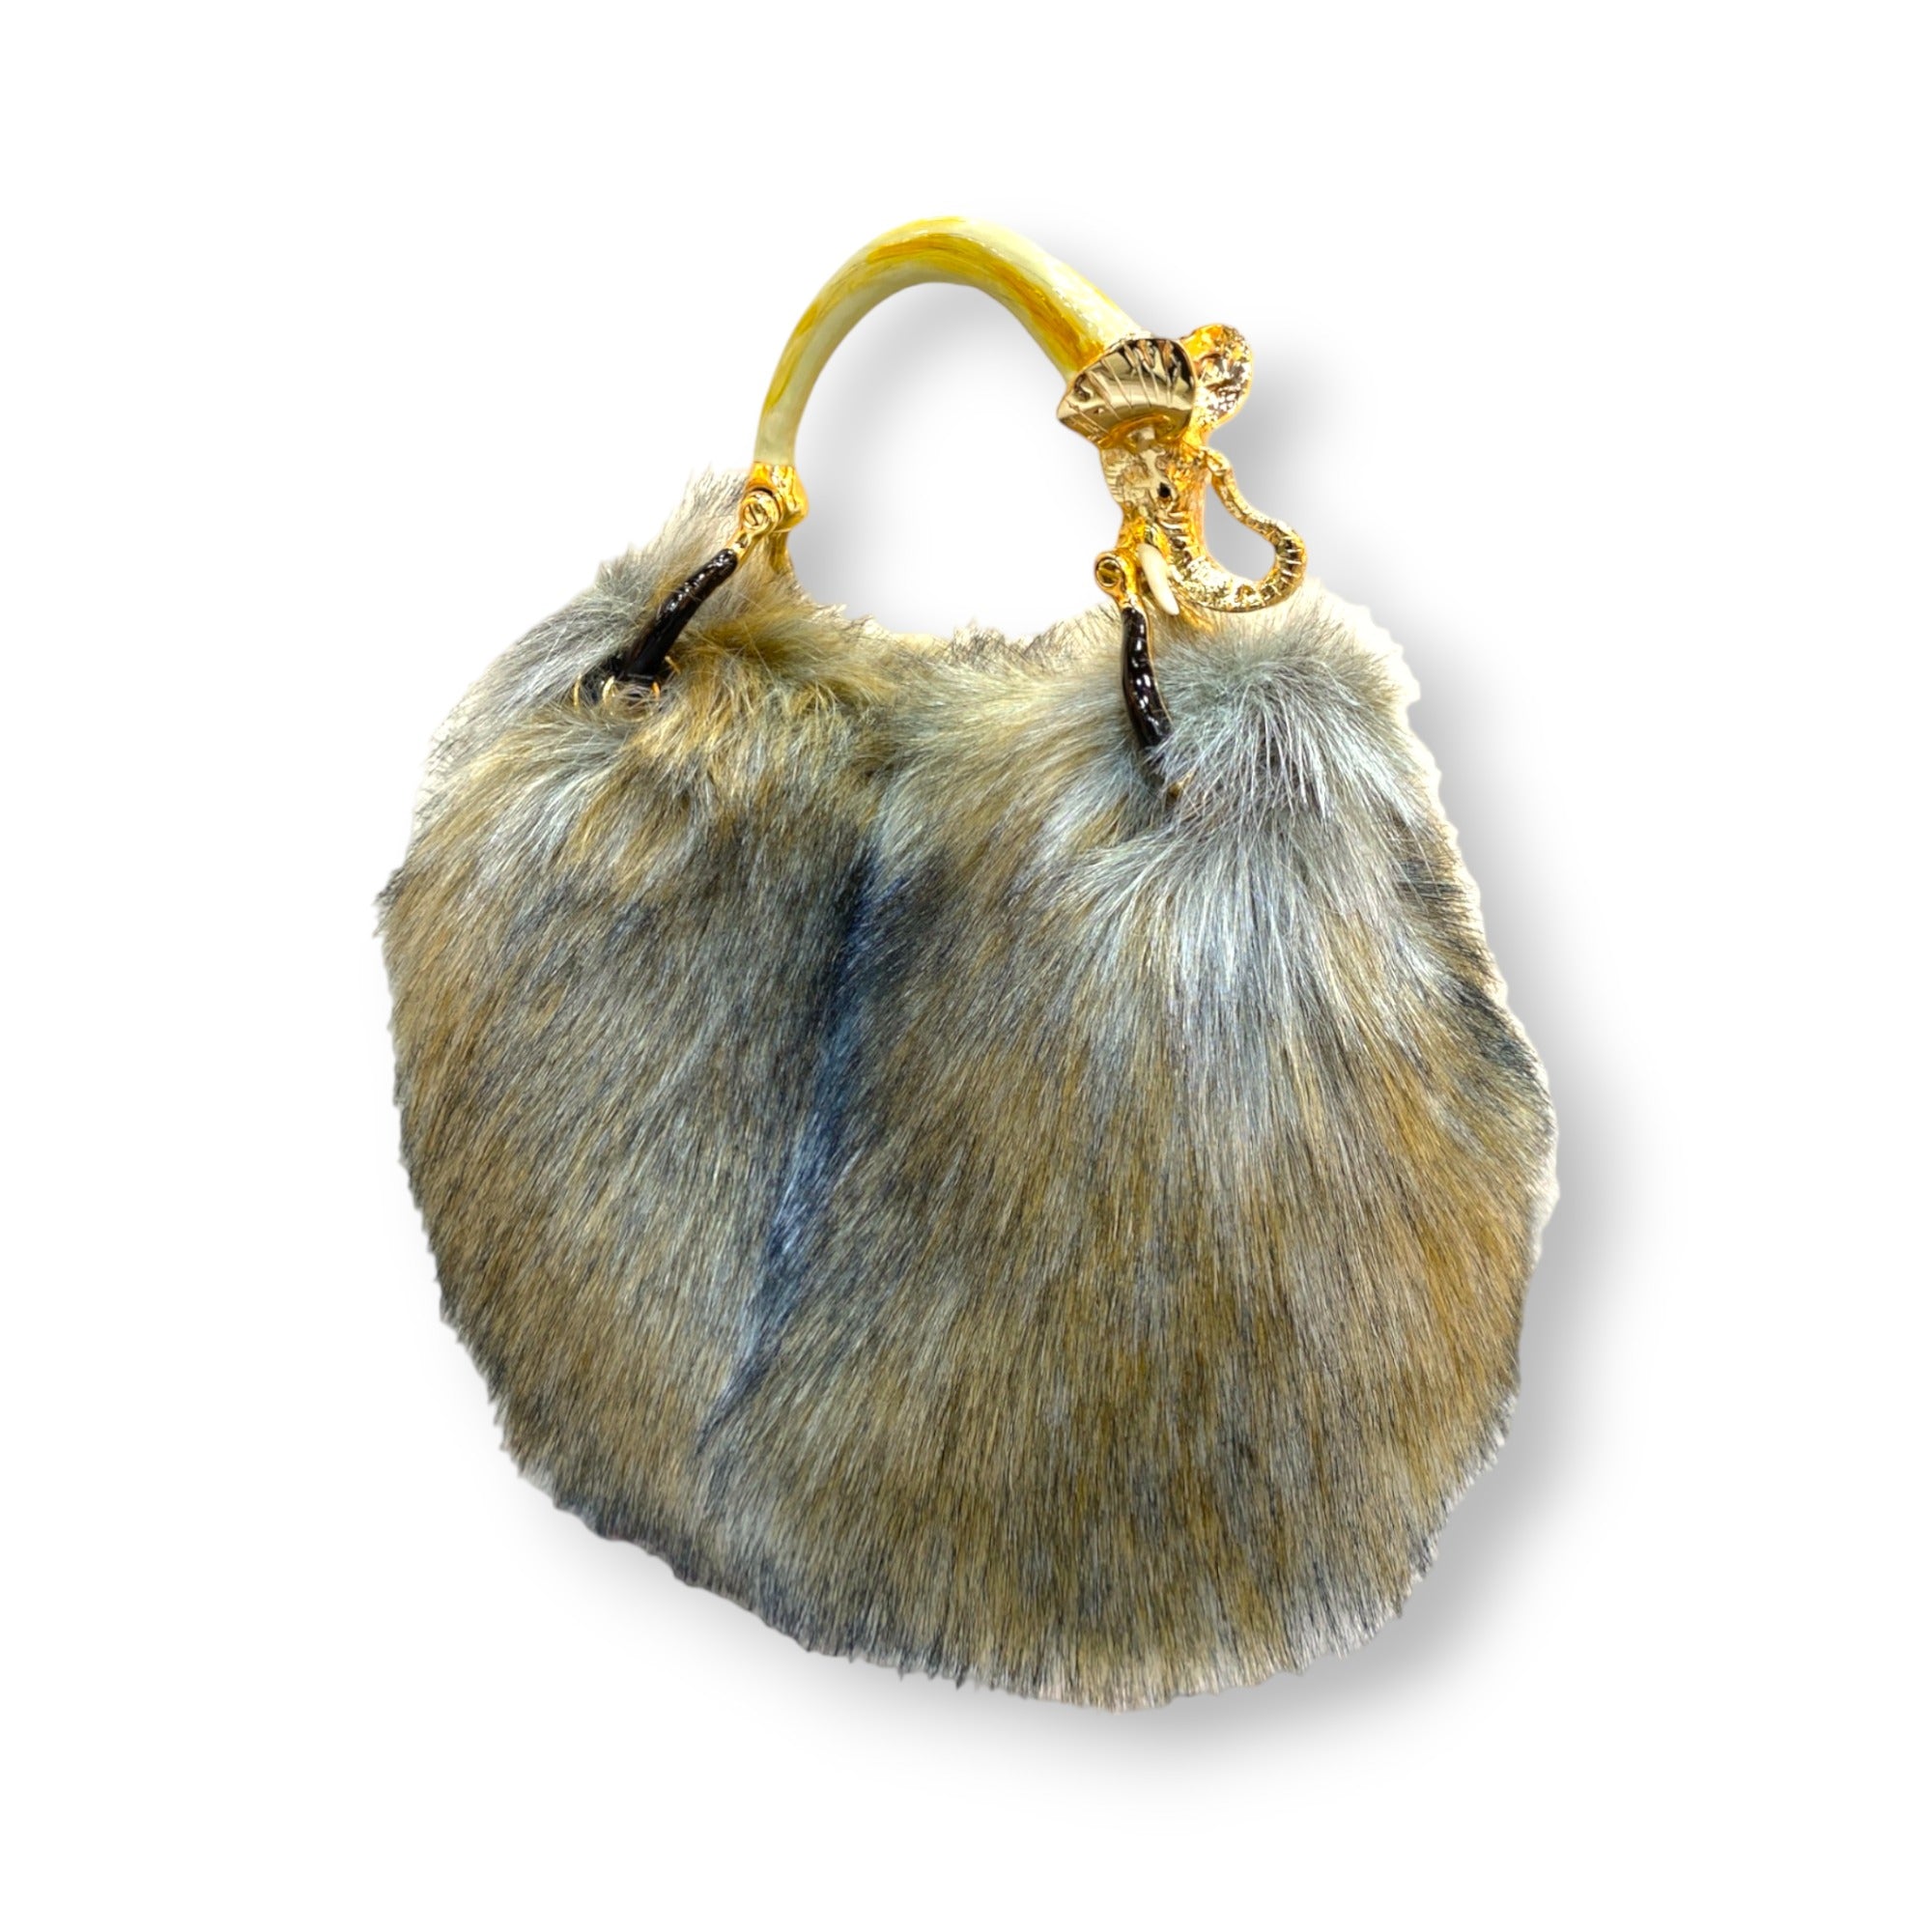 SMALL BAG IN FAUX FUR WHIT ELEPHANT HANDLE